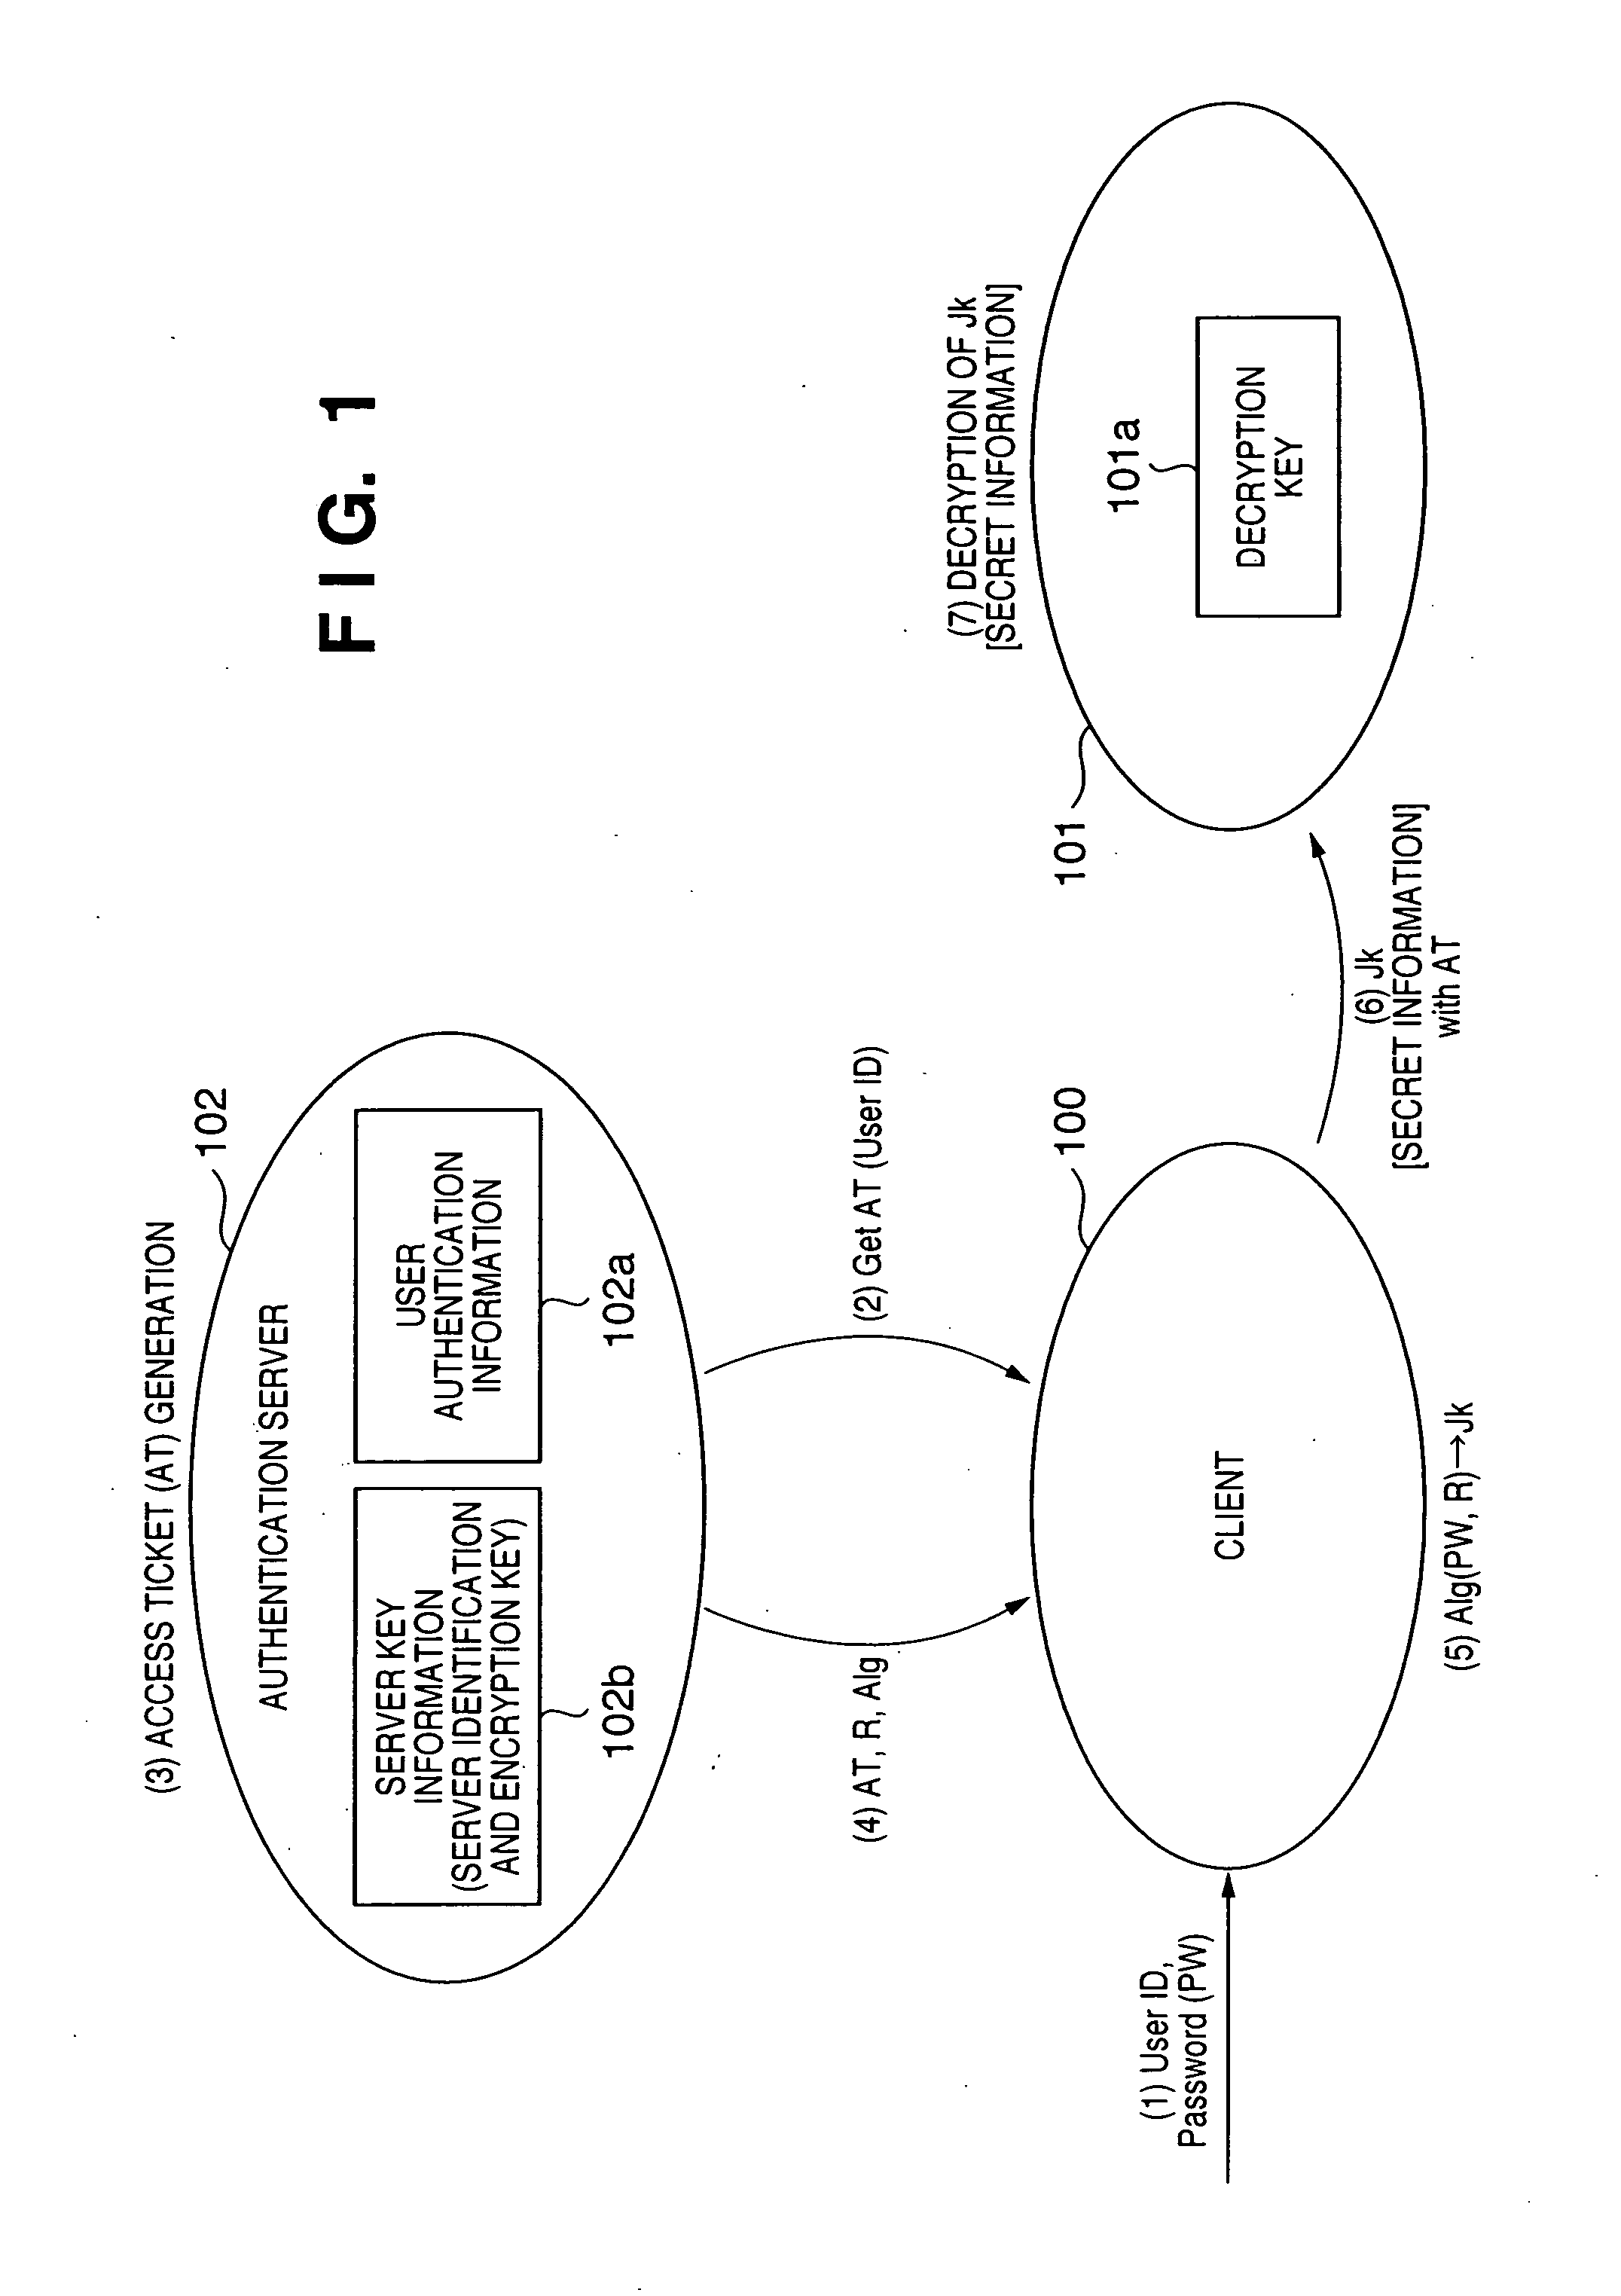 Encrypted communication method and system